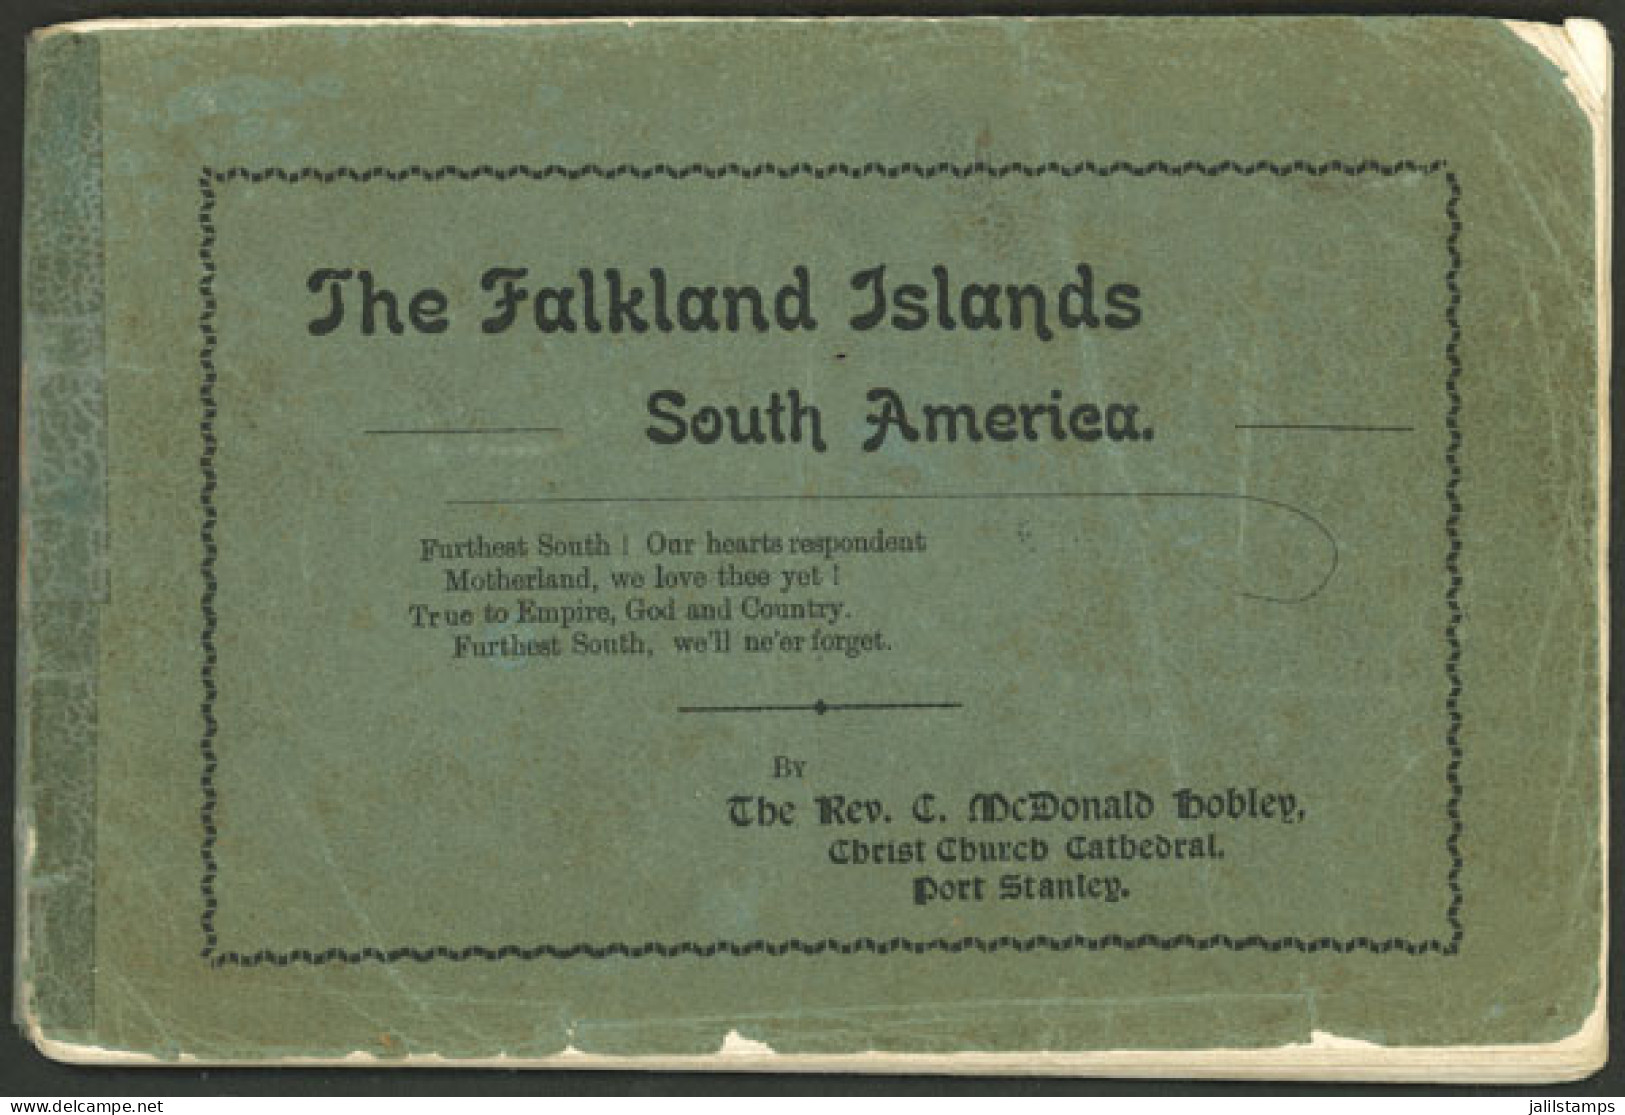 FALKLAND ISLANDS/MALVINAS: Small Illustrated Book Published In 1917 By Rev. Hobley, With Information About The Islands,  - Unclassified